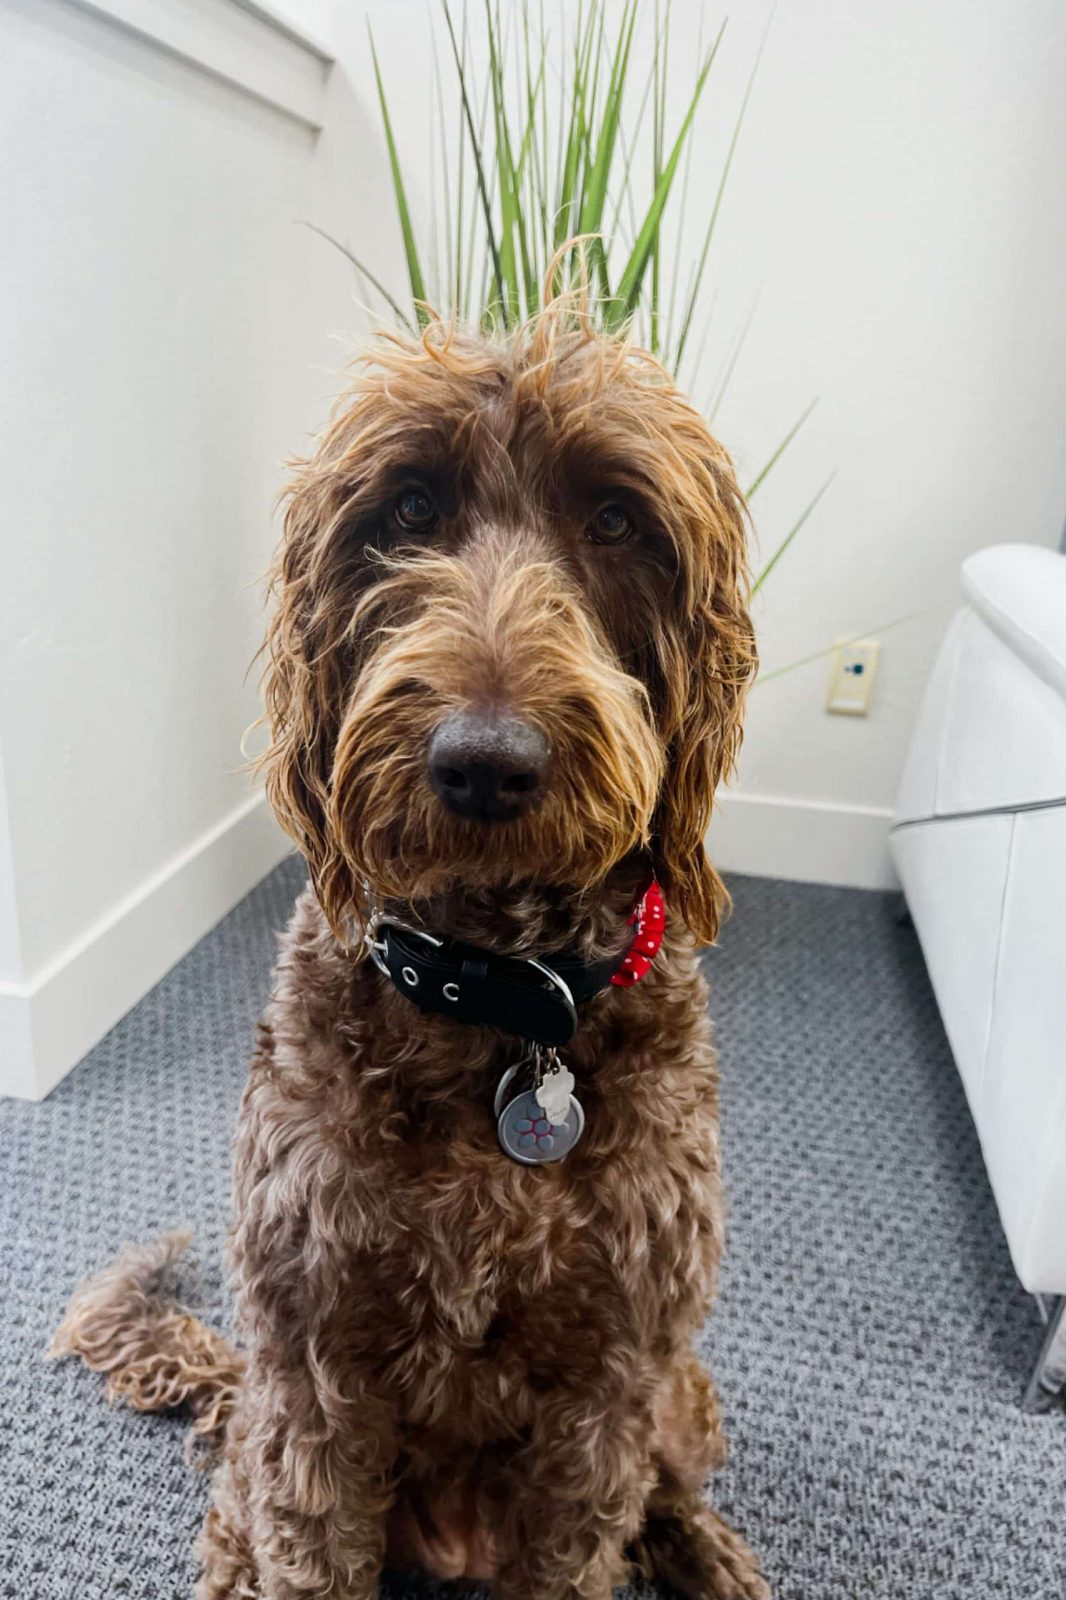 About us - Meet Missy, the office dog.